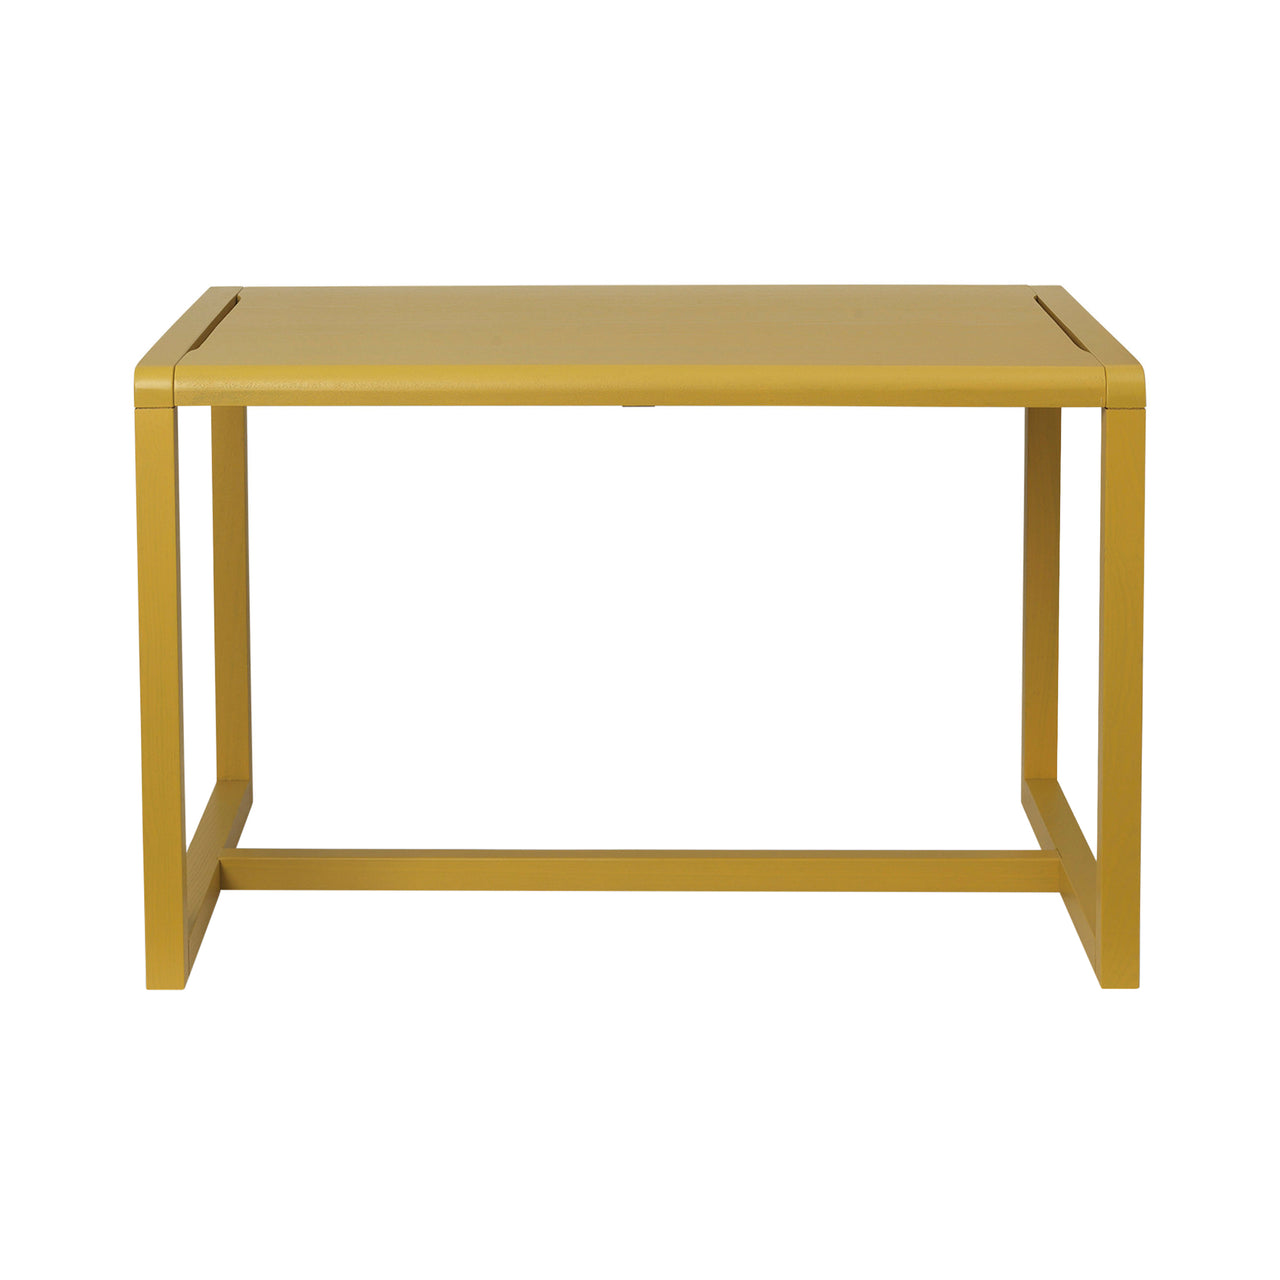 Little Architect Table: Yellow